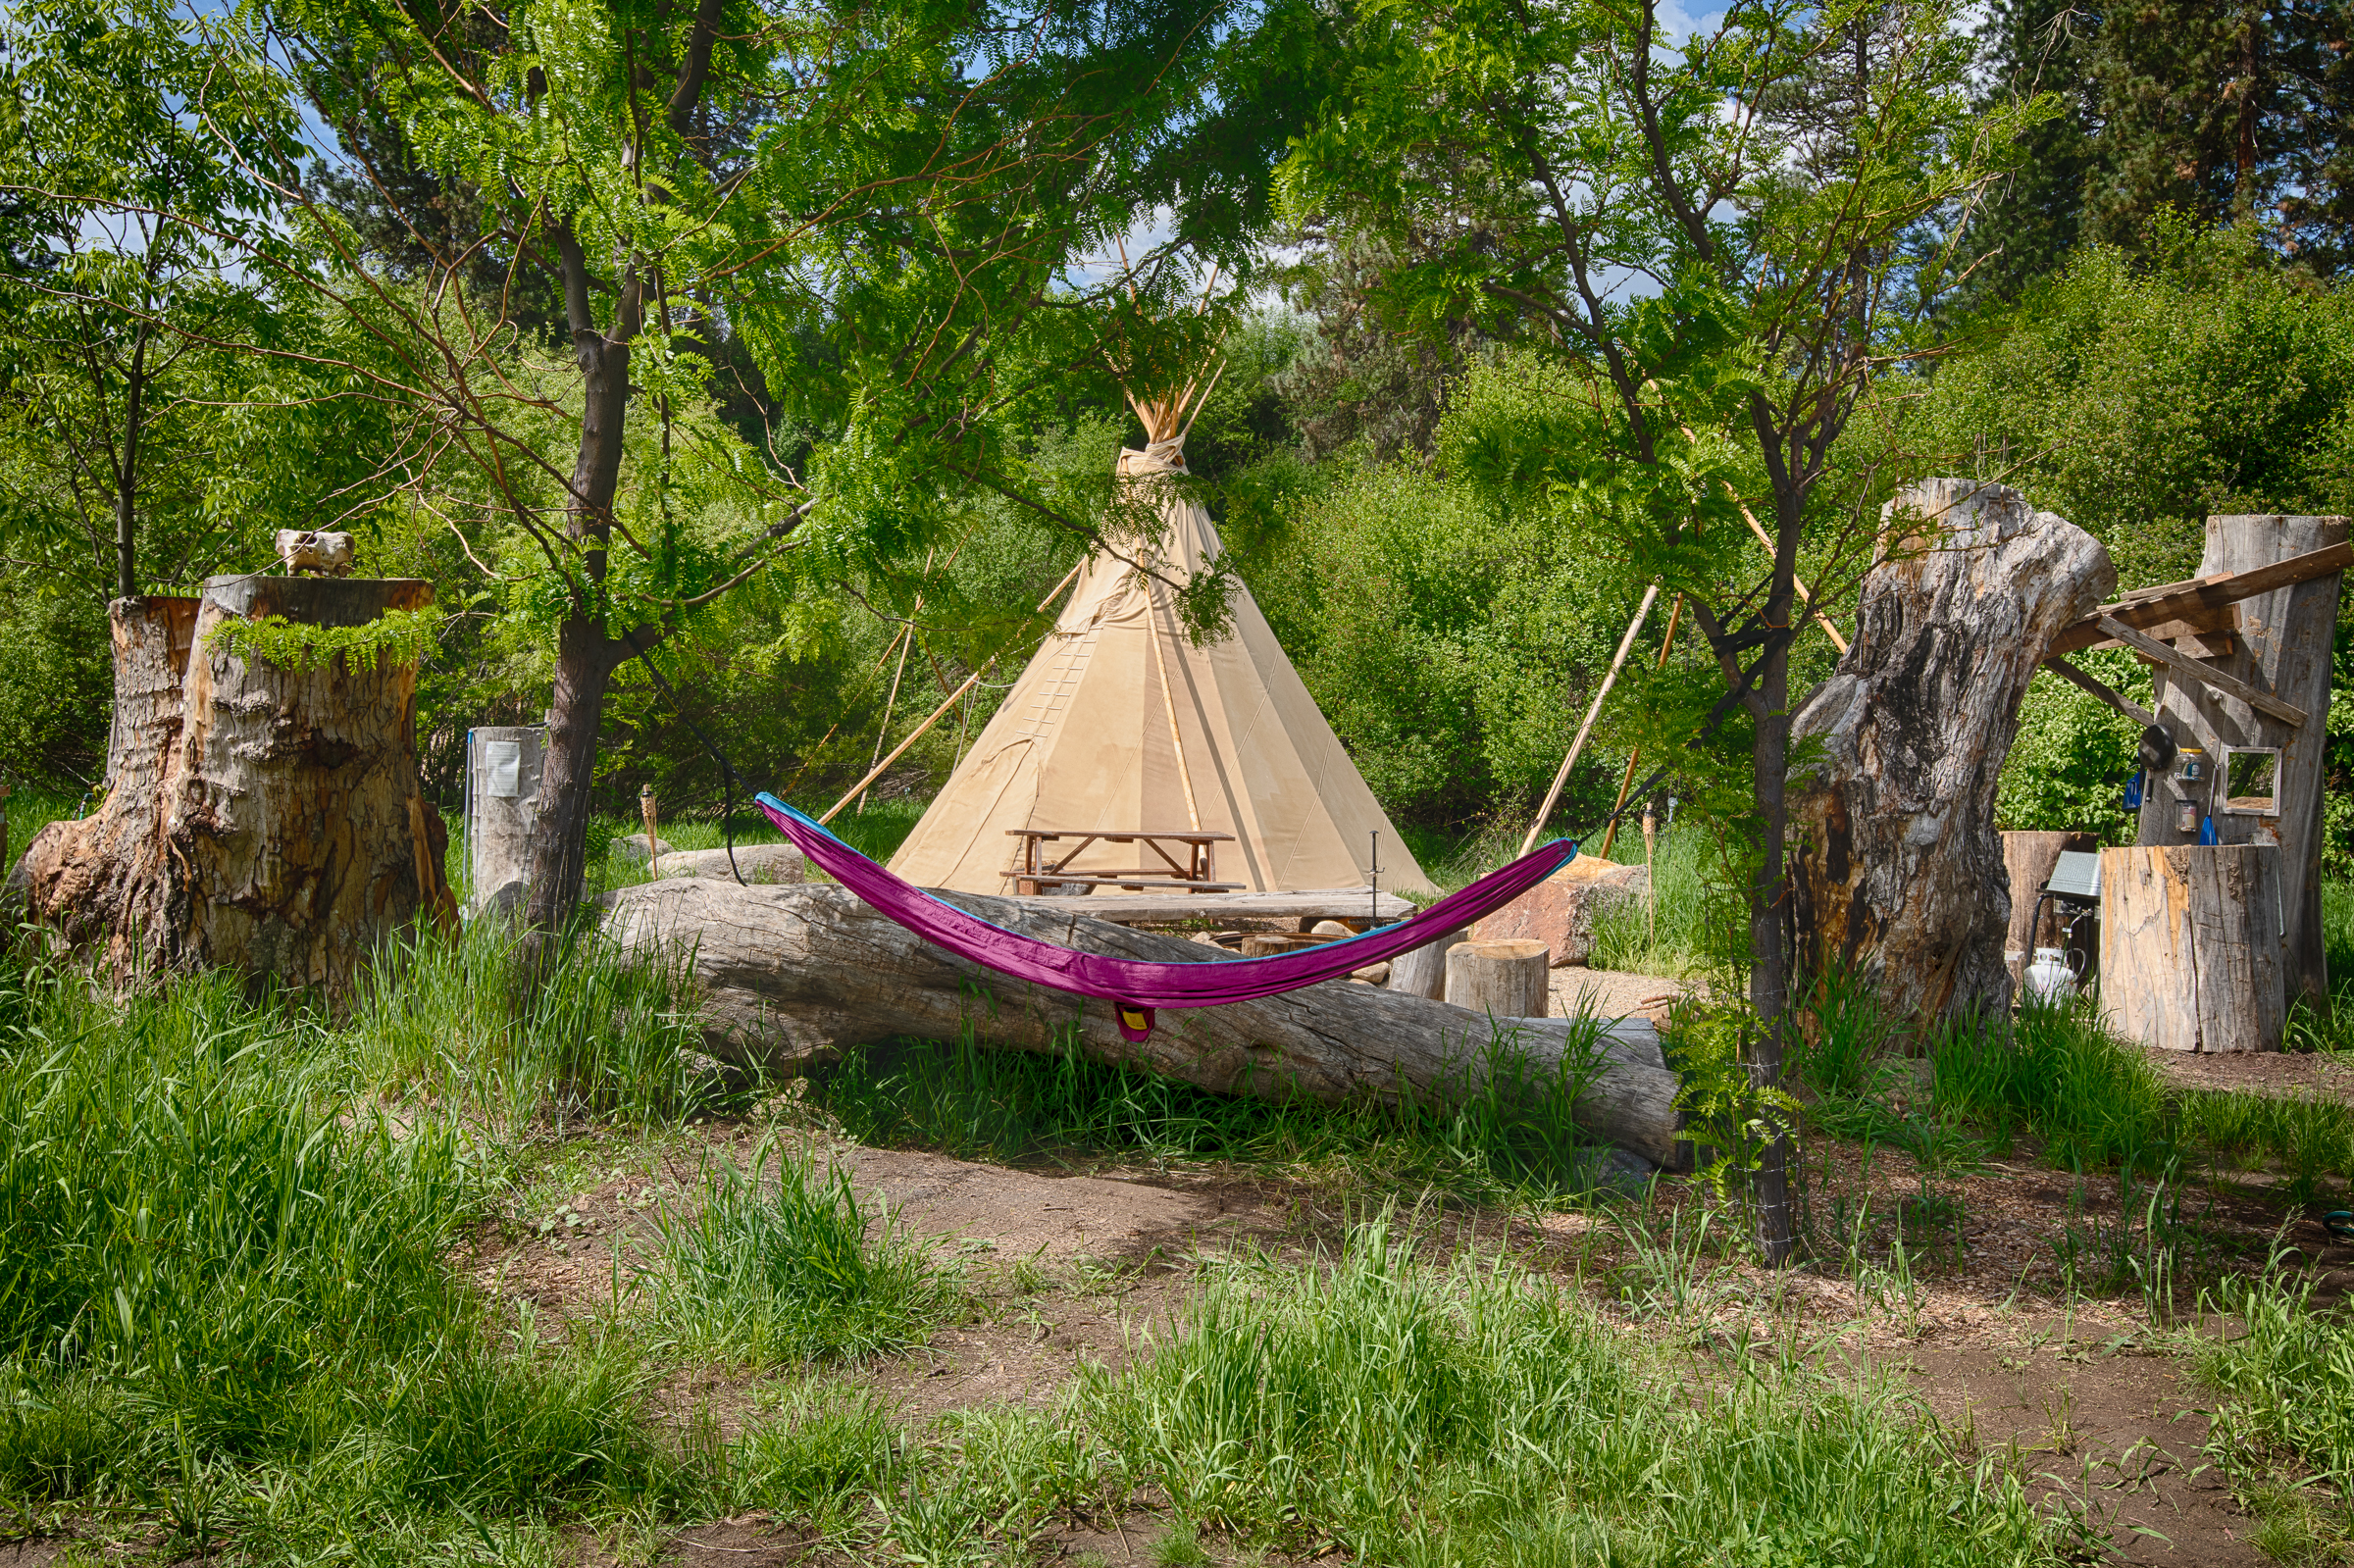 Peaceful scene of a beautiful Teepee with a hammock hanging in front of it on the Middle Fork of the Payette River in Garden Valley Idaho. I rentable campsite. 